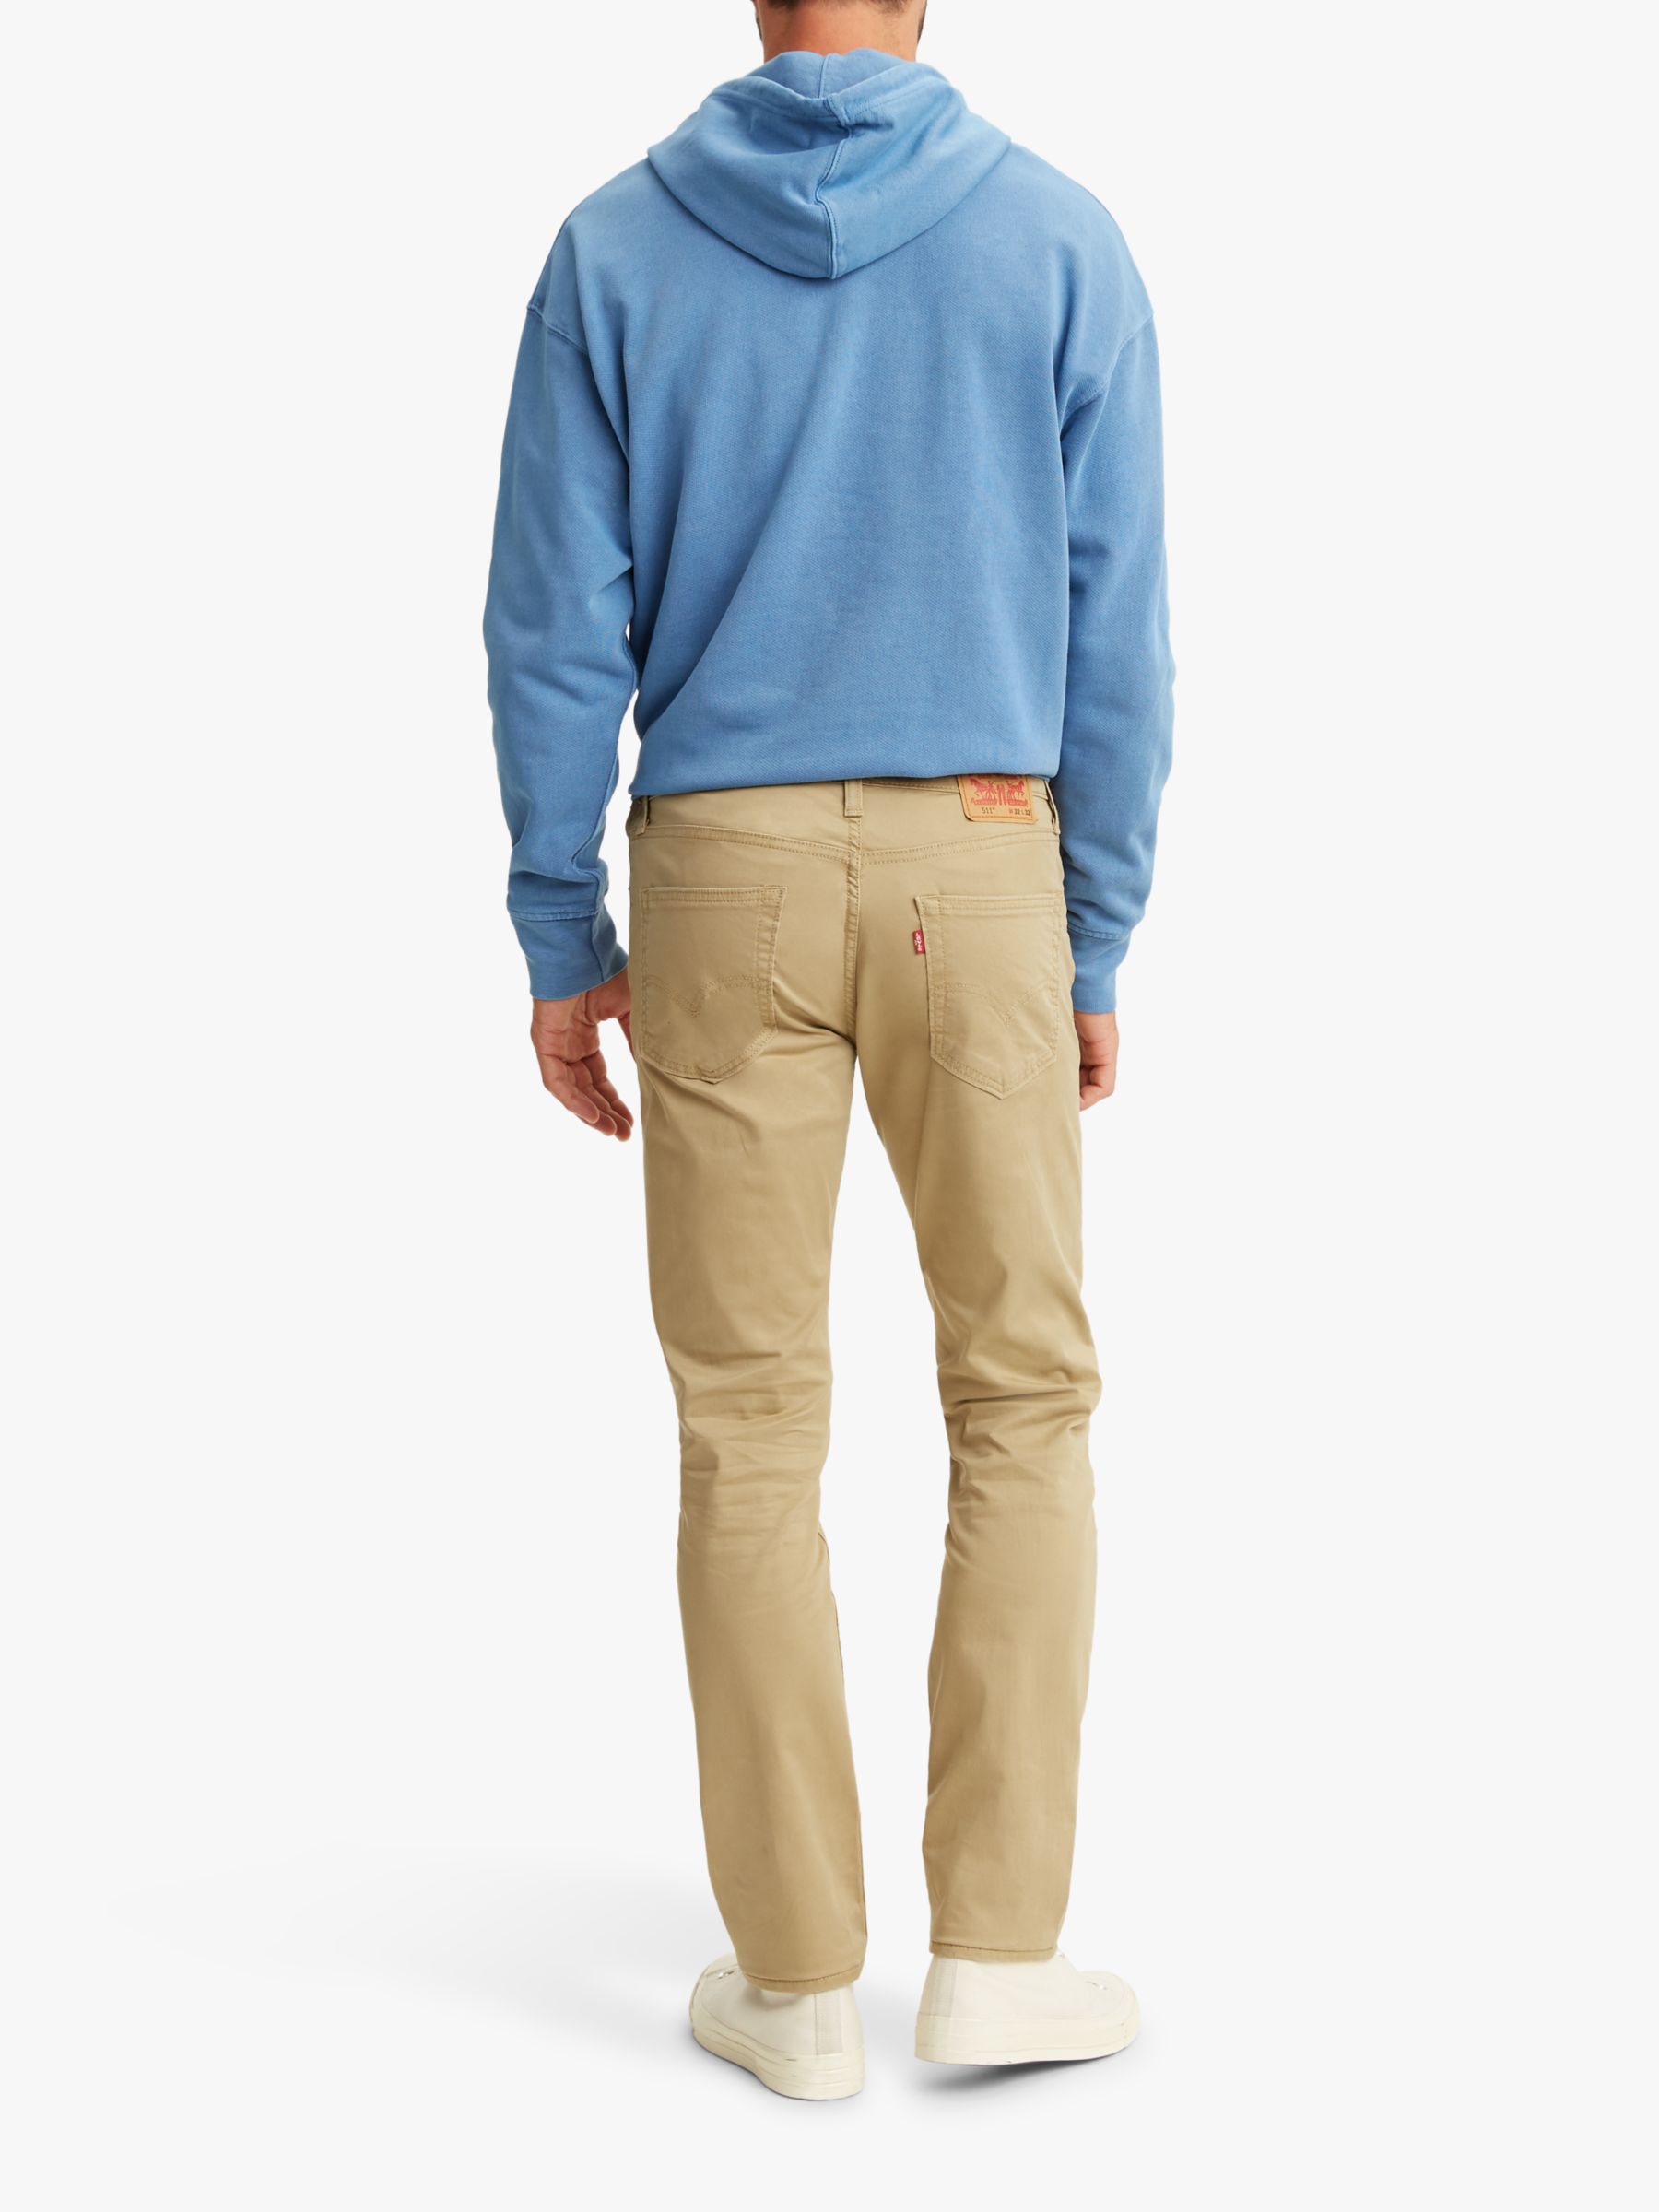 Levi's 511 Slim Fit Chinos, Harvest Gold Sueded at John Lewis & Partners